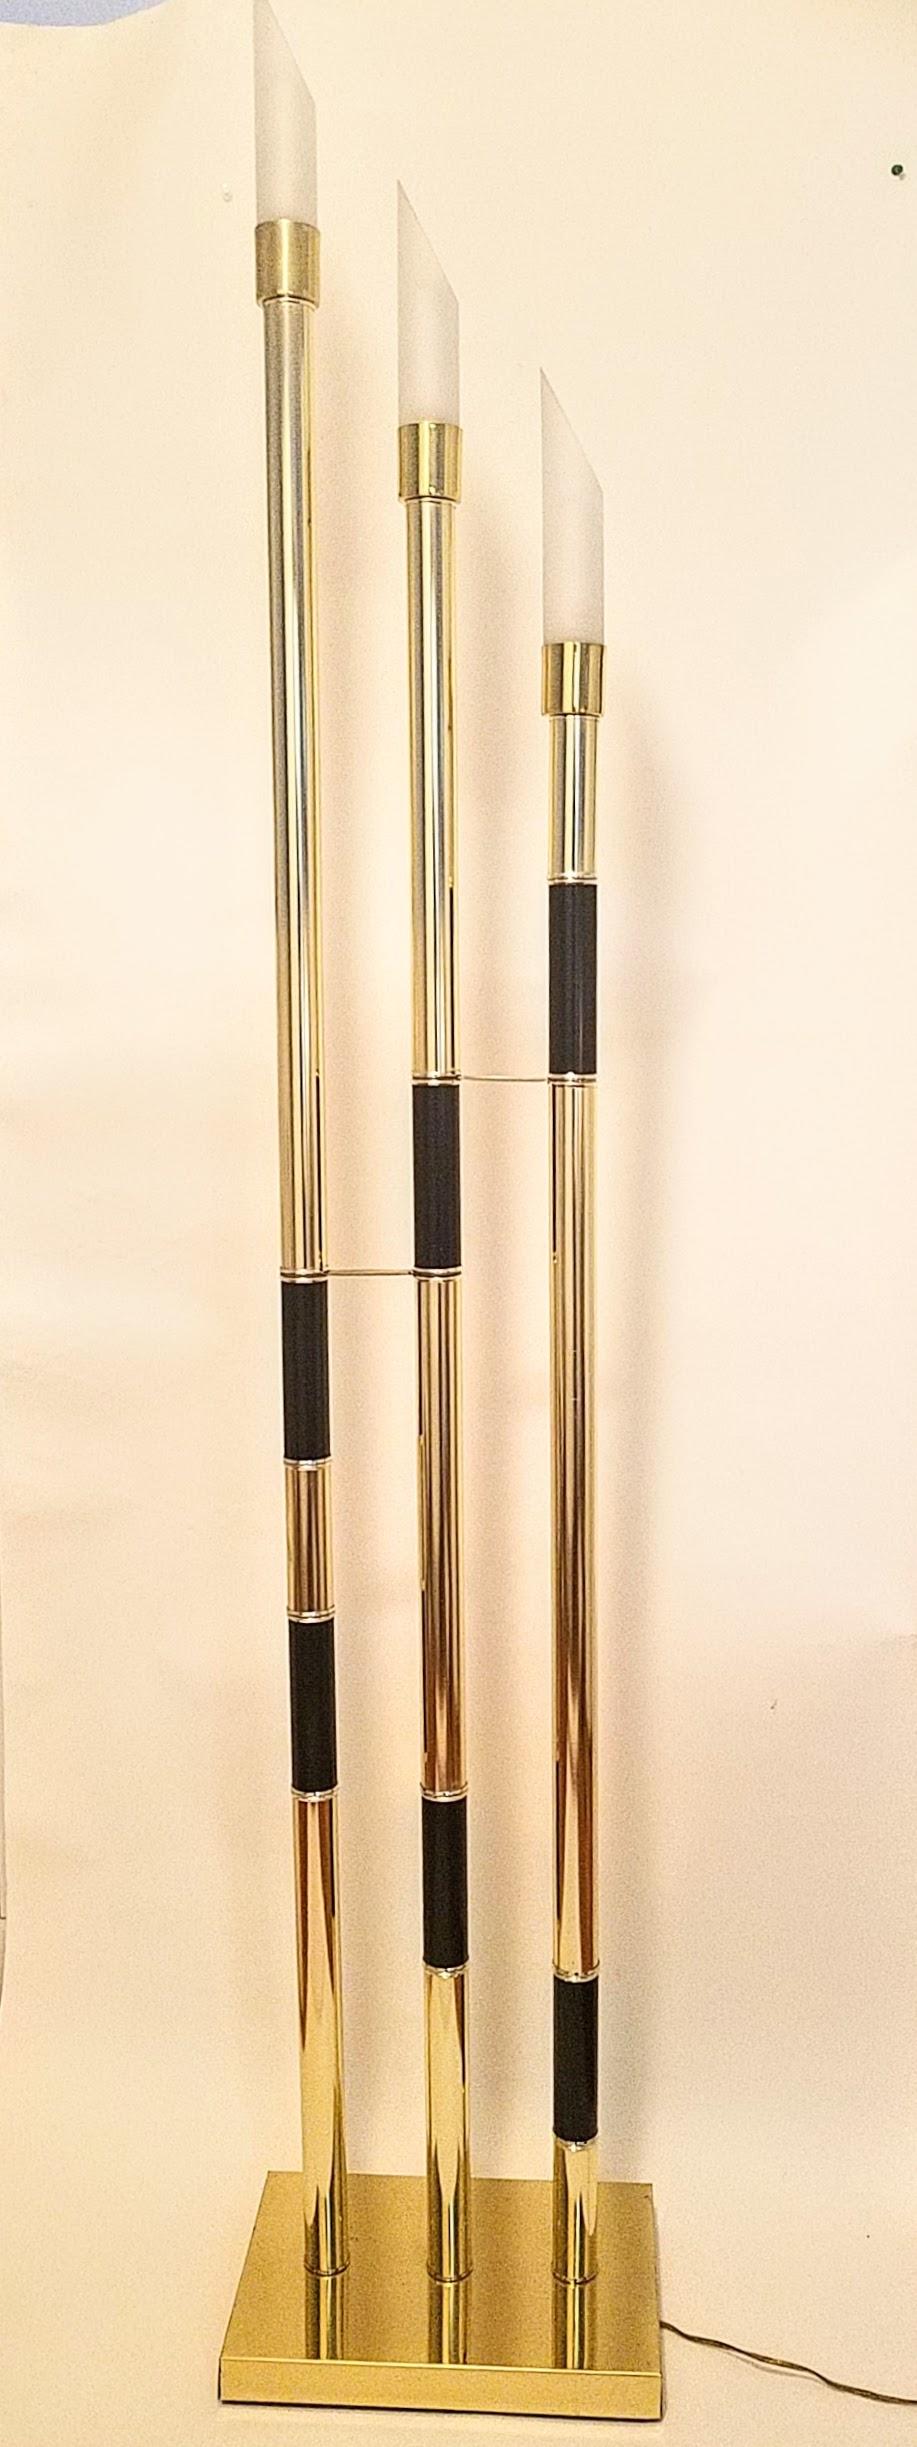 Relco Italian floor lamp has three polished brass tubes are decorated with rings of black lacquer. The floor lamp has an in line dimmer and three nine inch frosted glass shade inserts. Manufactured in Milan, Italy by in the mid- 1980s.
The lamp is